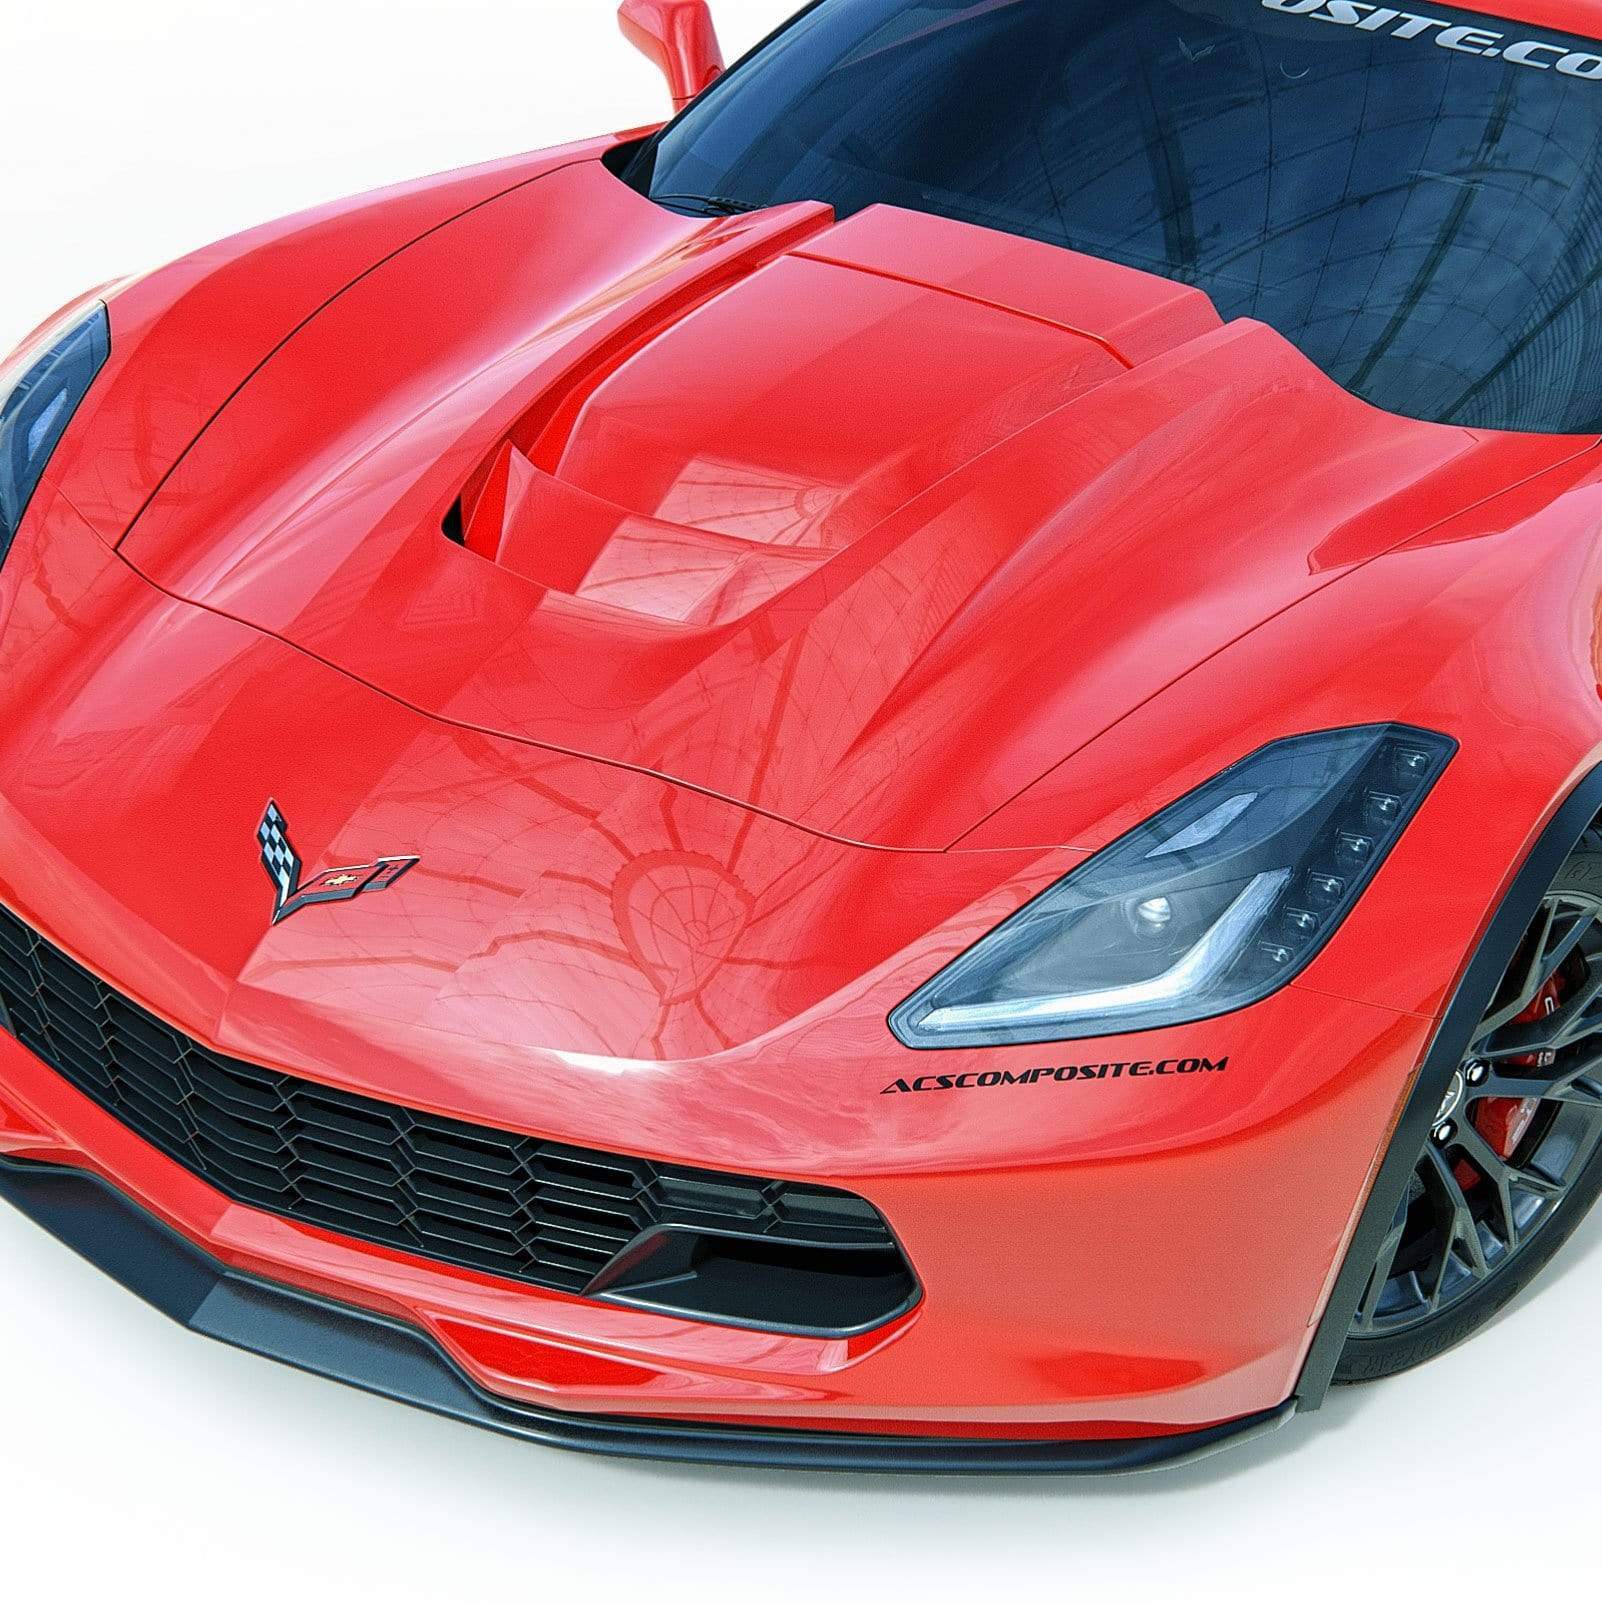 ACS Composite C7-ZR1 Hood for Chevrolet Corvette C7, SKU 45-4-203, in Fiber-Reinforced Polymer (FRP) with vented extractor system.